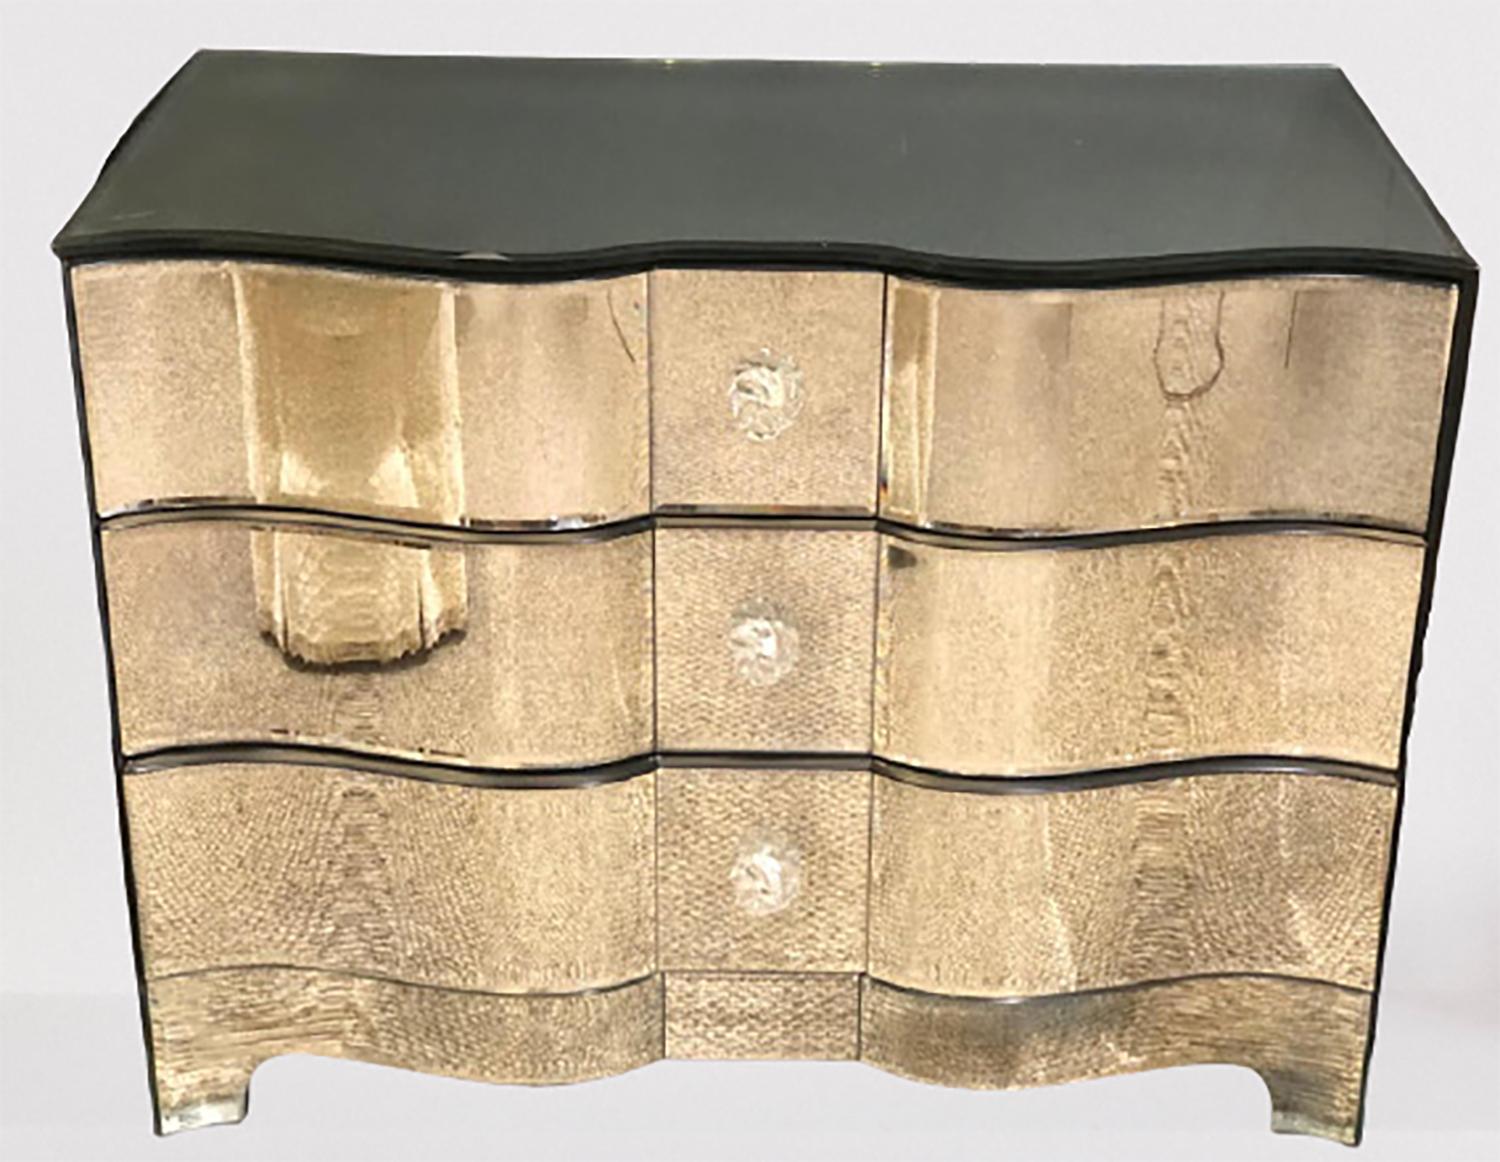 Hollywood Regency style mirrored chest, dresser, nightstand by Lorin Marsh. This sleek and stylish Lorin Marsh Design Regency style mirrored dresser sports a fine serpentine front with crystal pulls having an all around antiqued mirrored glass. This